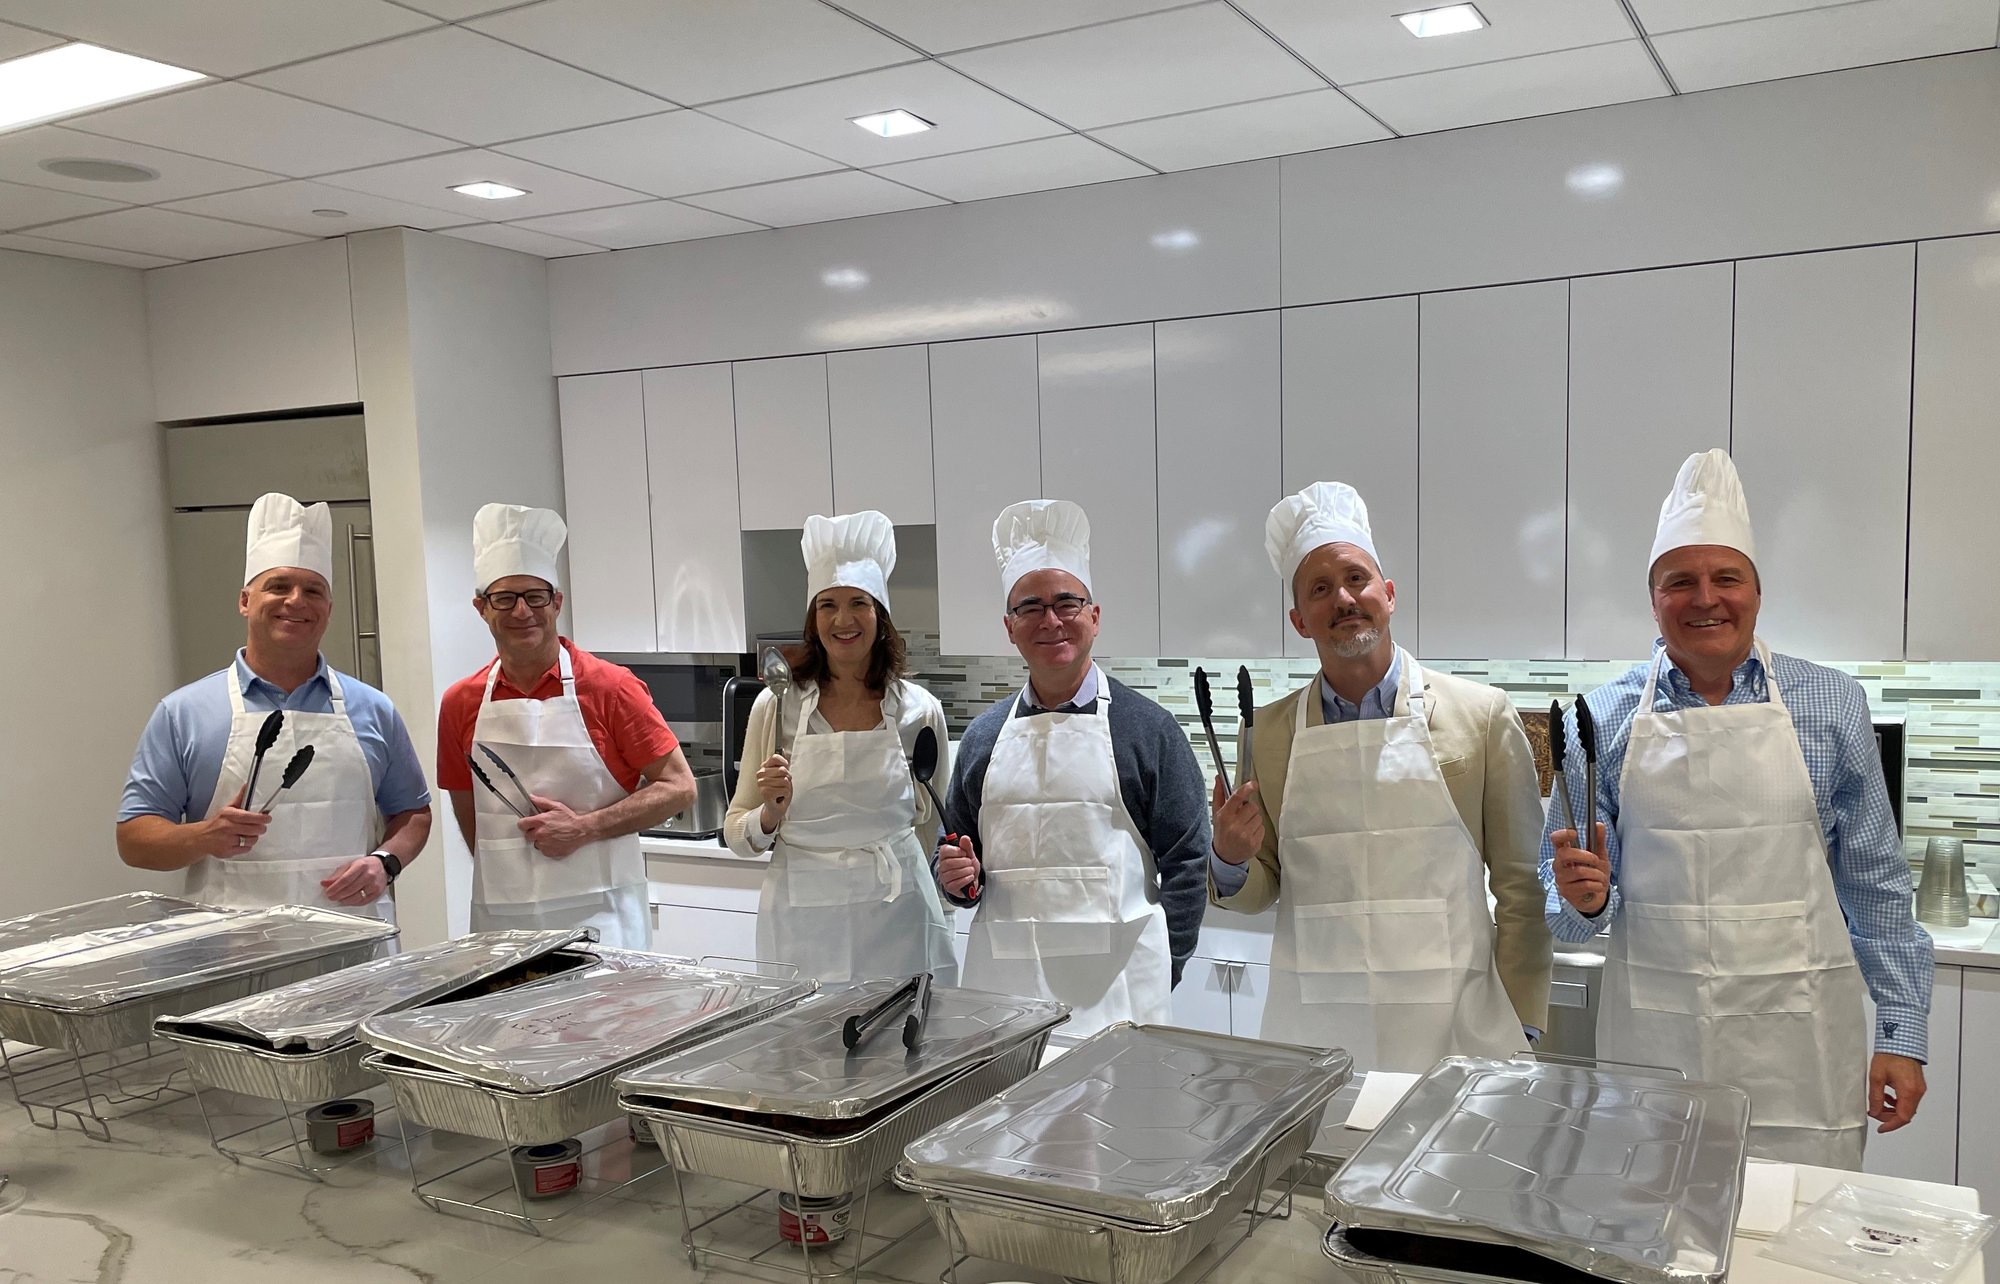 Our attorneys celebrated our FDH administrative team by serving up a firm-wide, sit-down lunch and acknowledging each staff member’s contributions to the firm.   